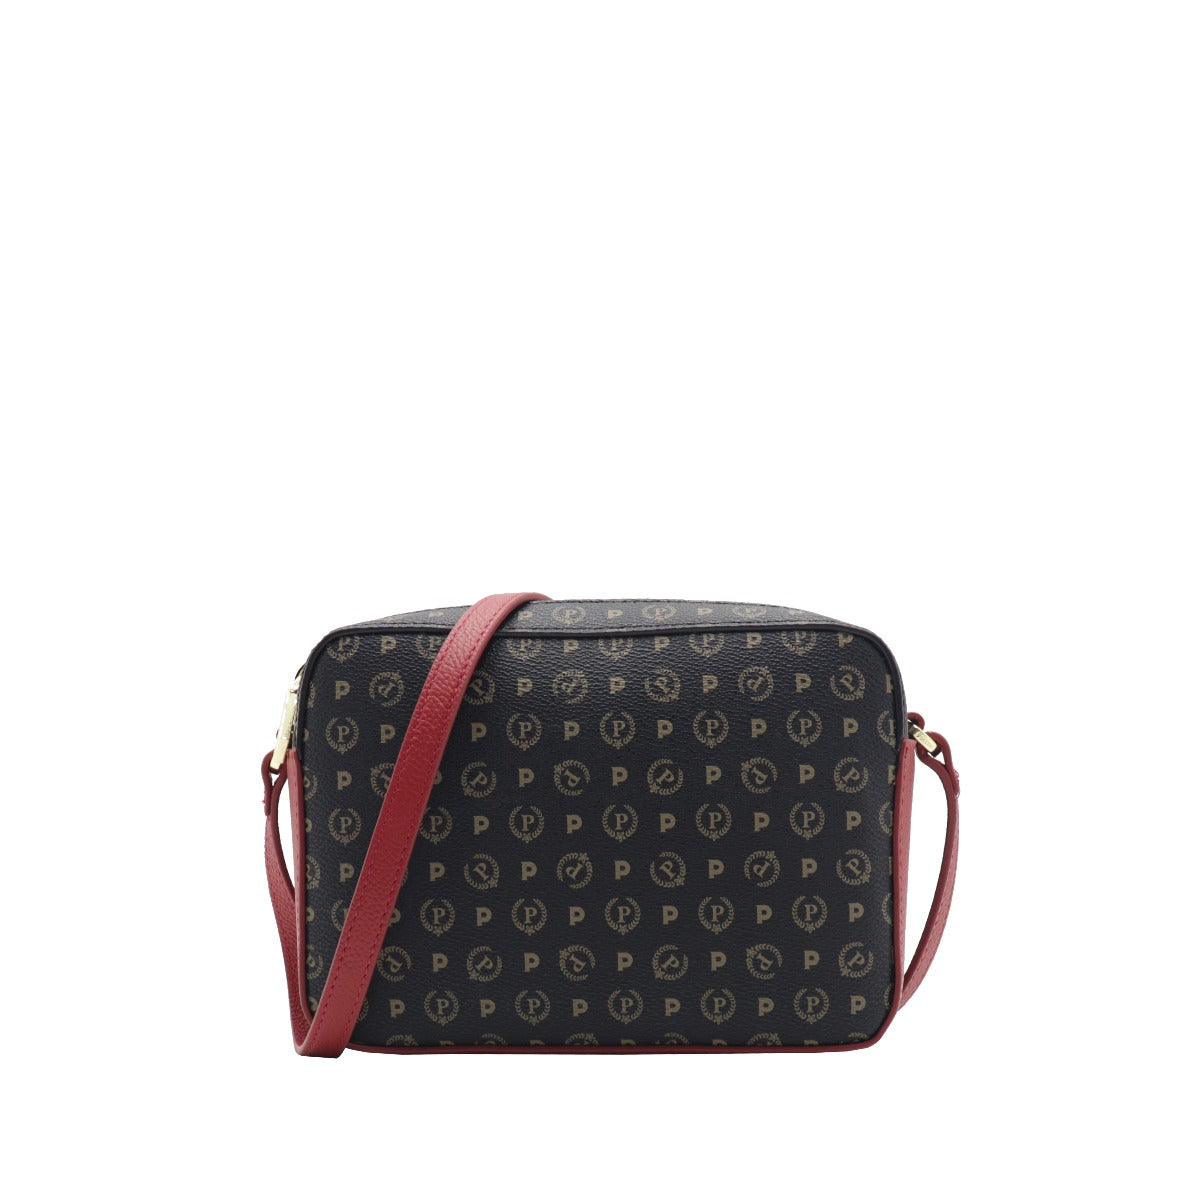 Pollini Heritage Shoulder Bag in Black and Lacquer